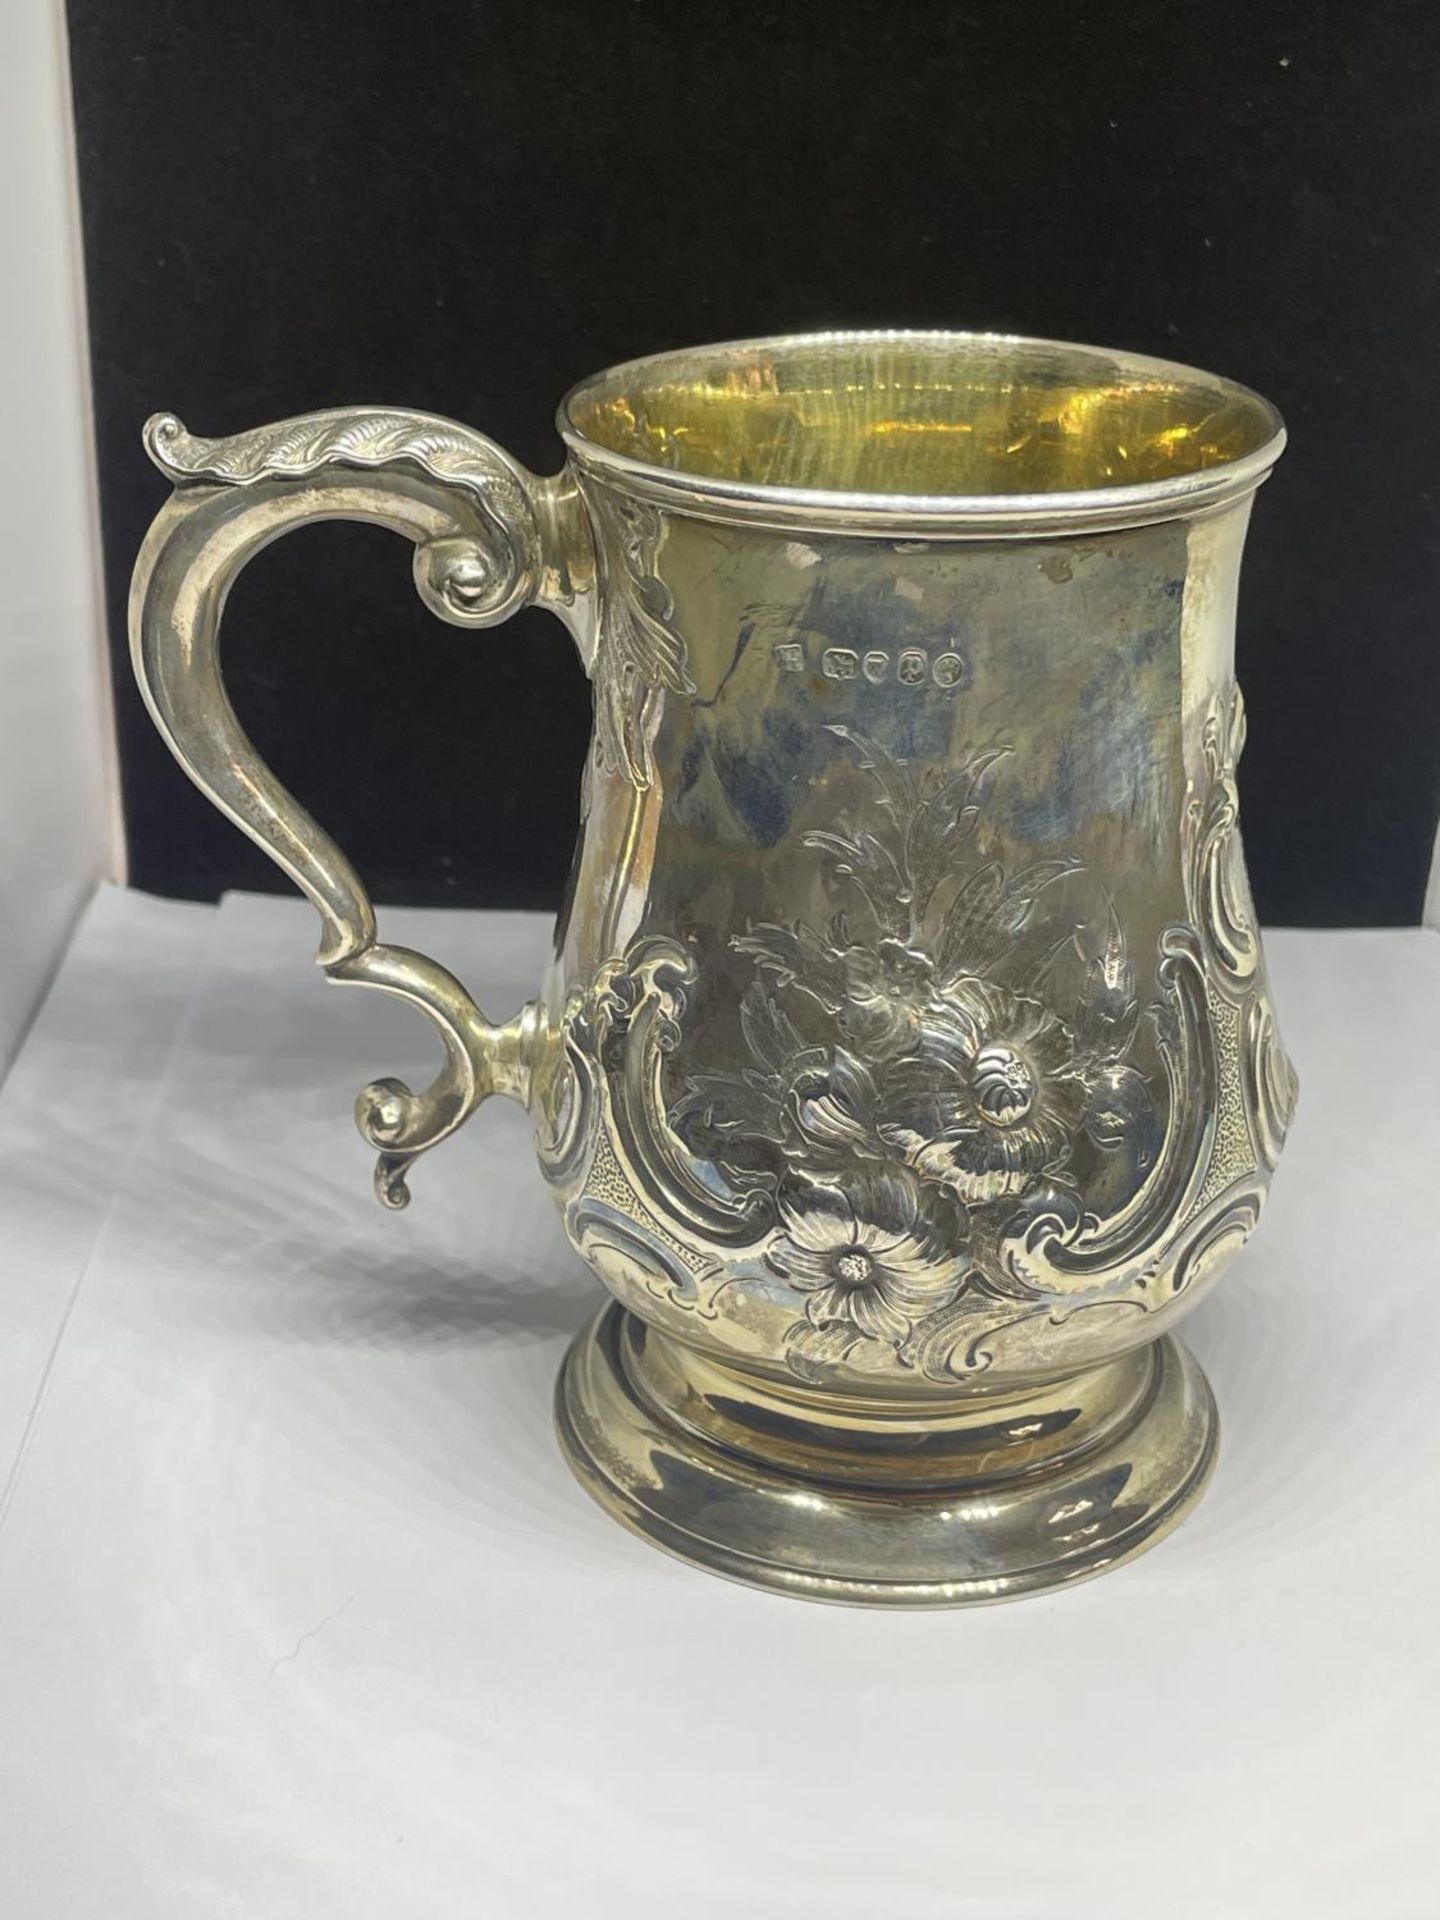 A HALLMARKED LONDON SILVER DECORATIVE TANKARD GROSS WEIGHT 263.9 GRAMS - Image 3 of 3